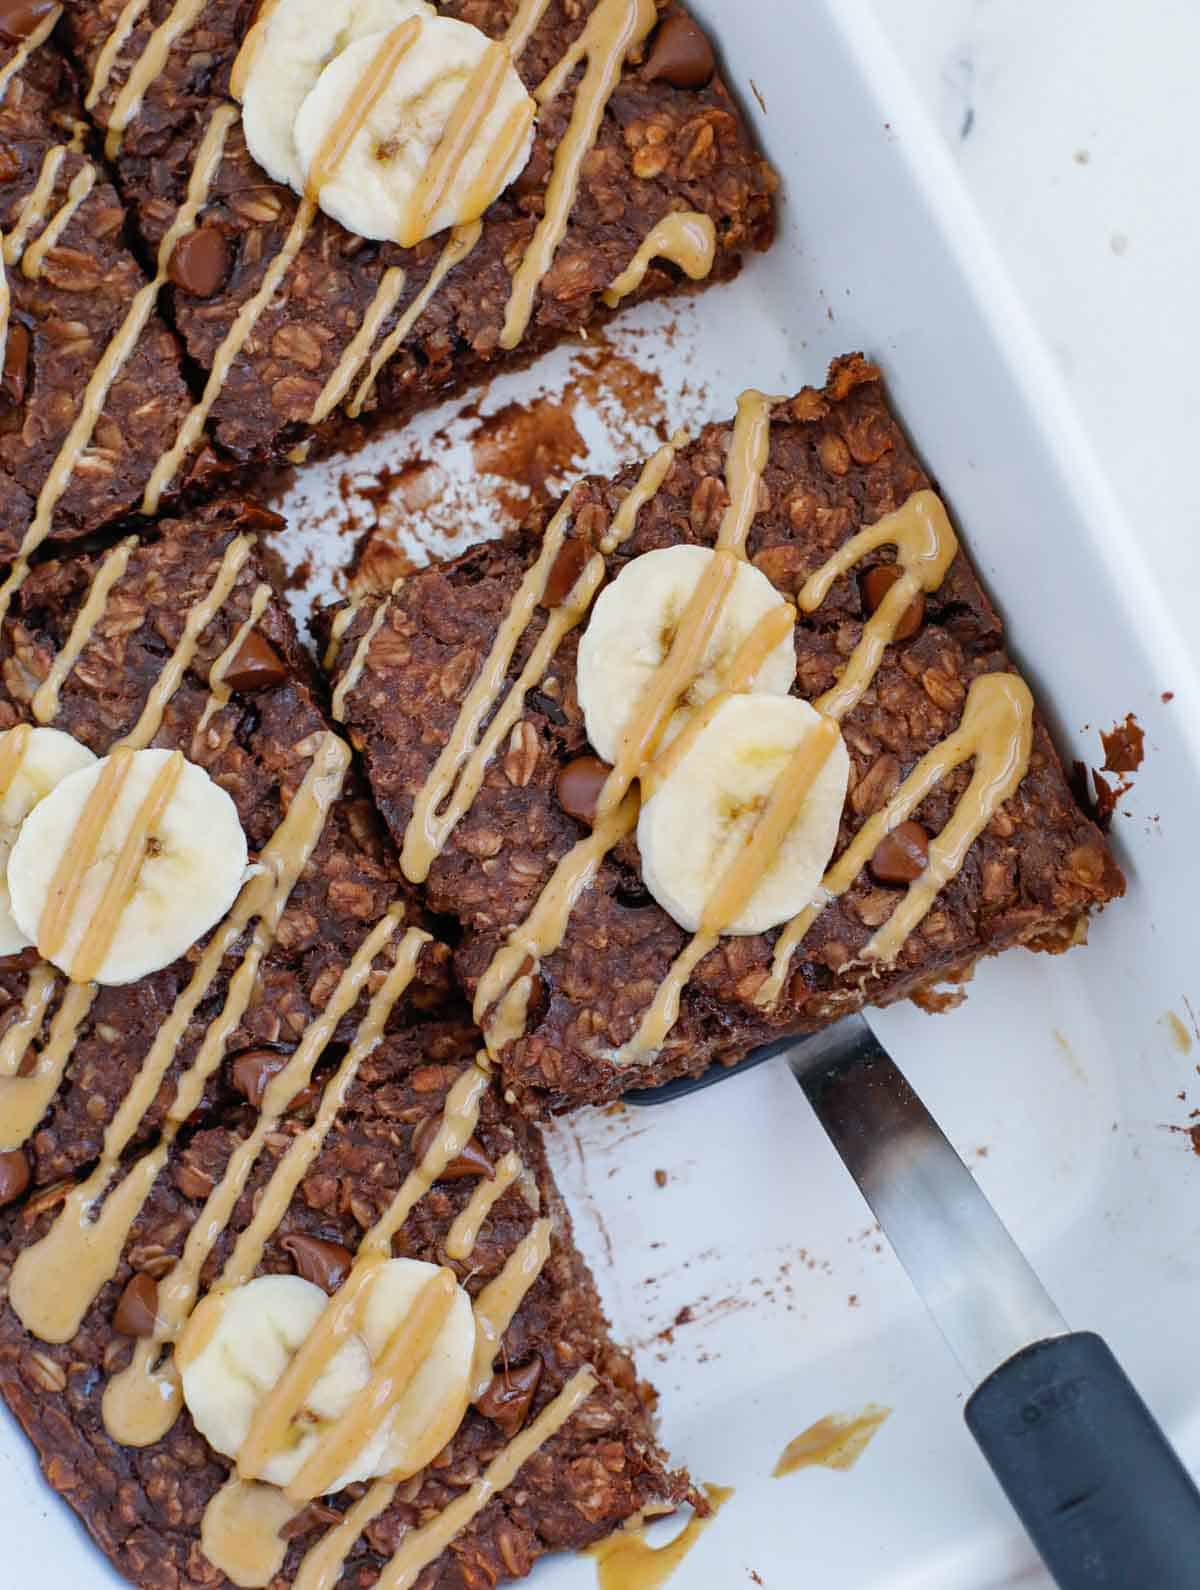 chocolate baked oats after baking, topped with fresh slices of banana and drizzle of peanut butter.